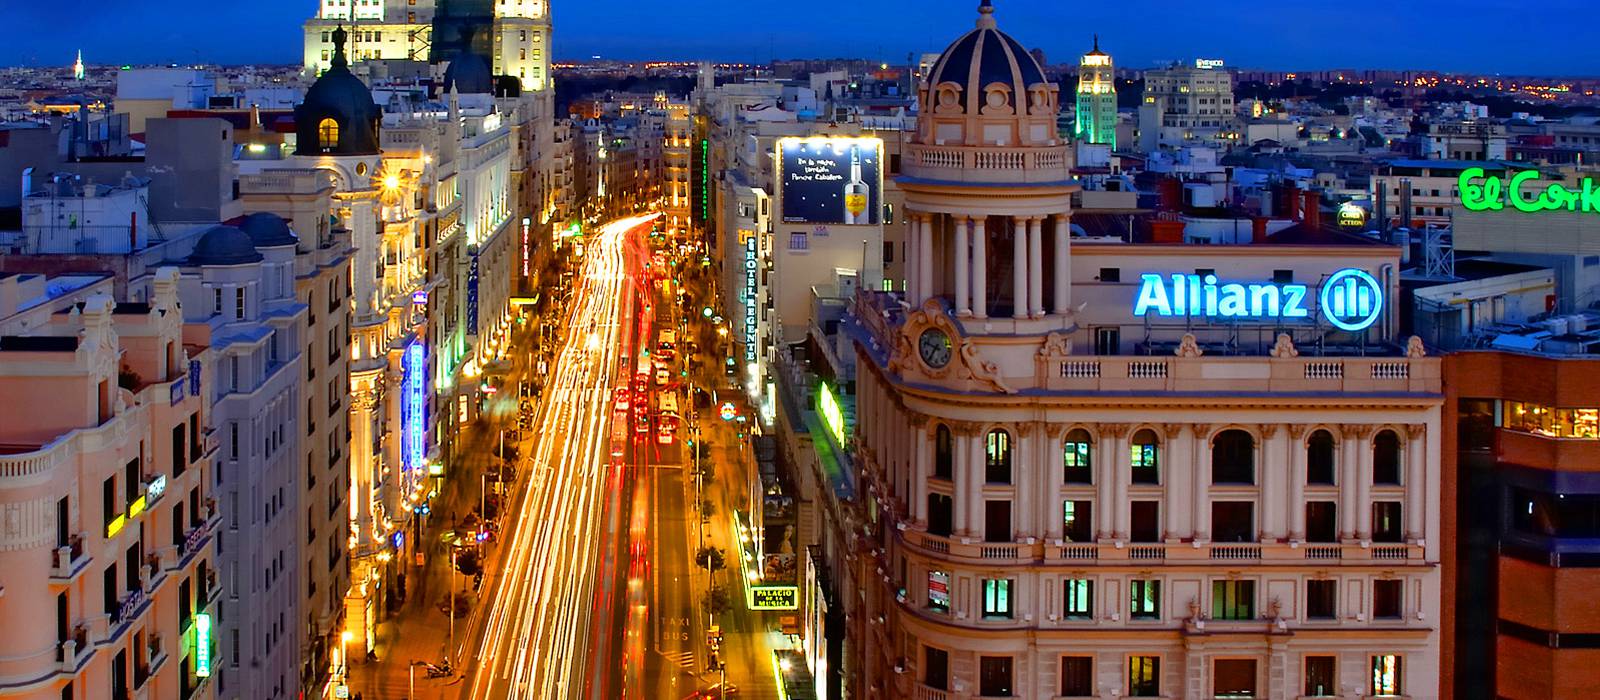 Promotions Hotel Vincci Madrid Capitol - Stay 3 nights and save! -15%